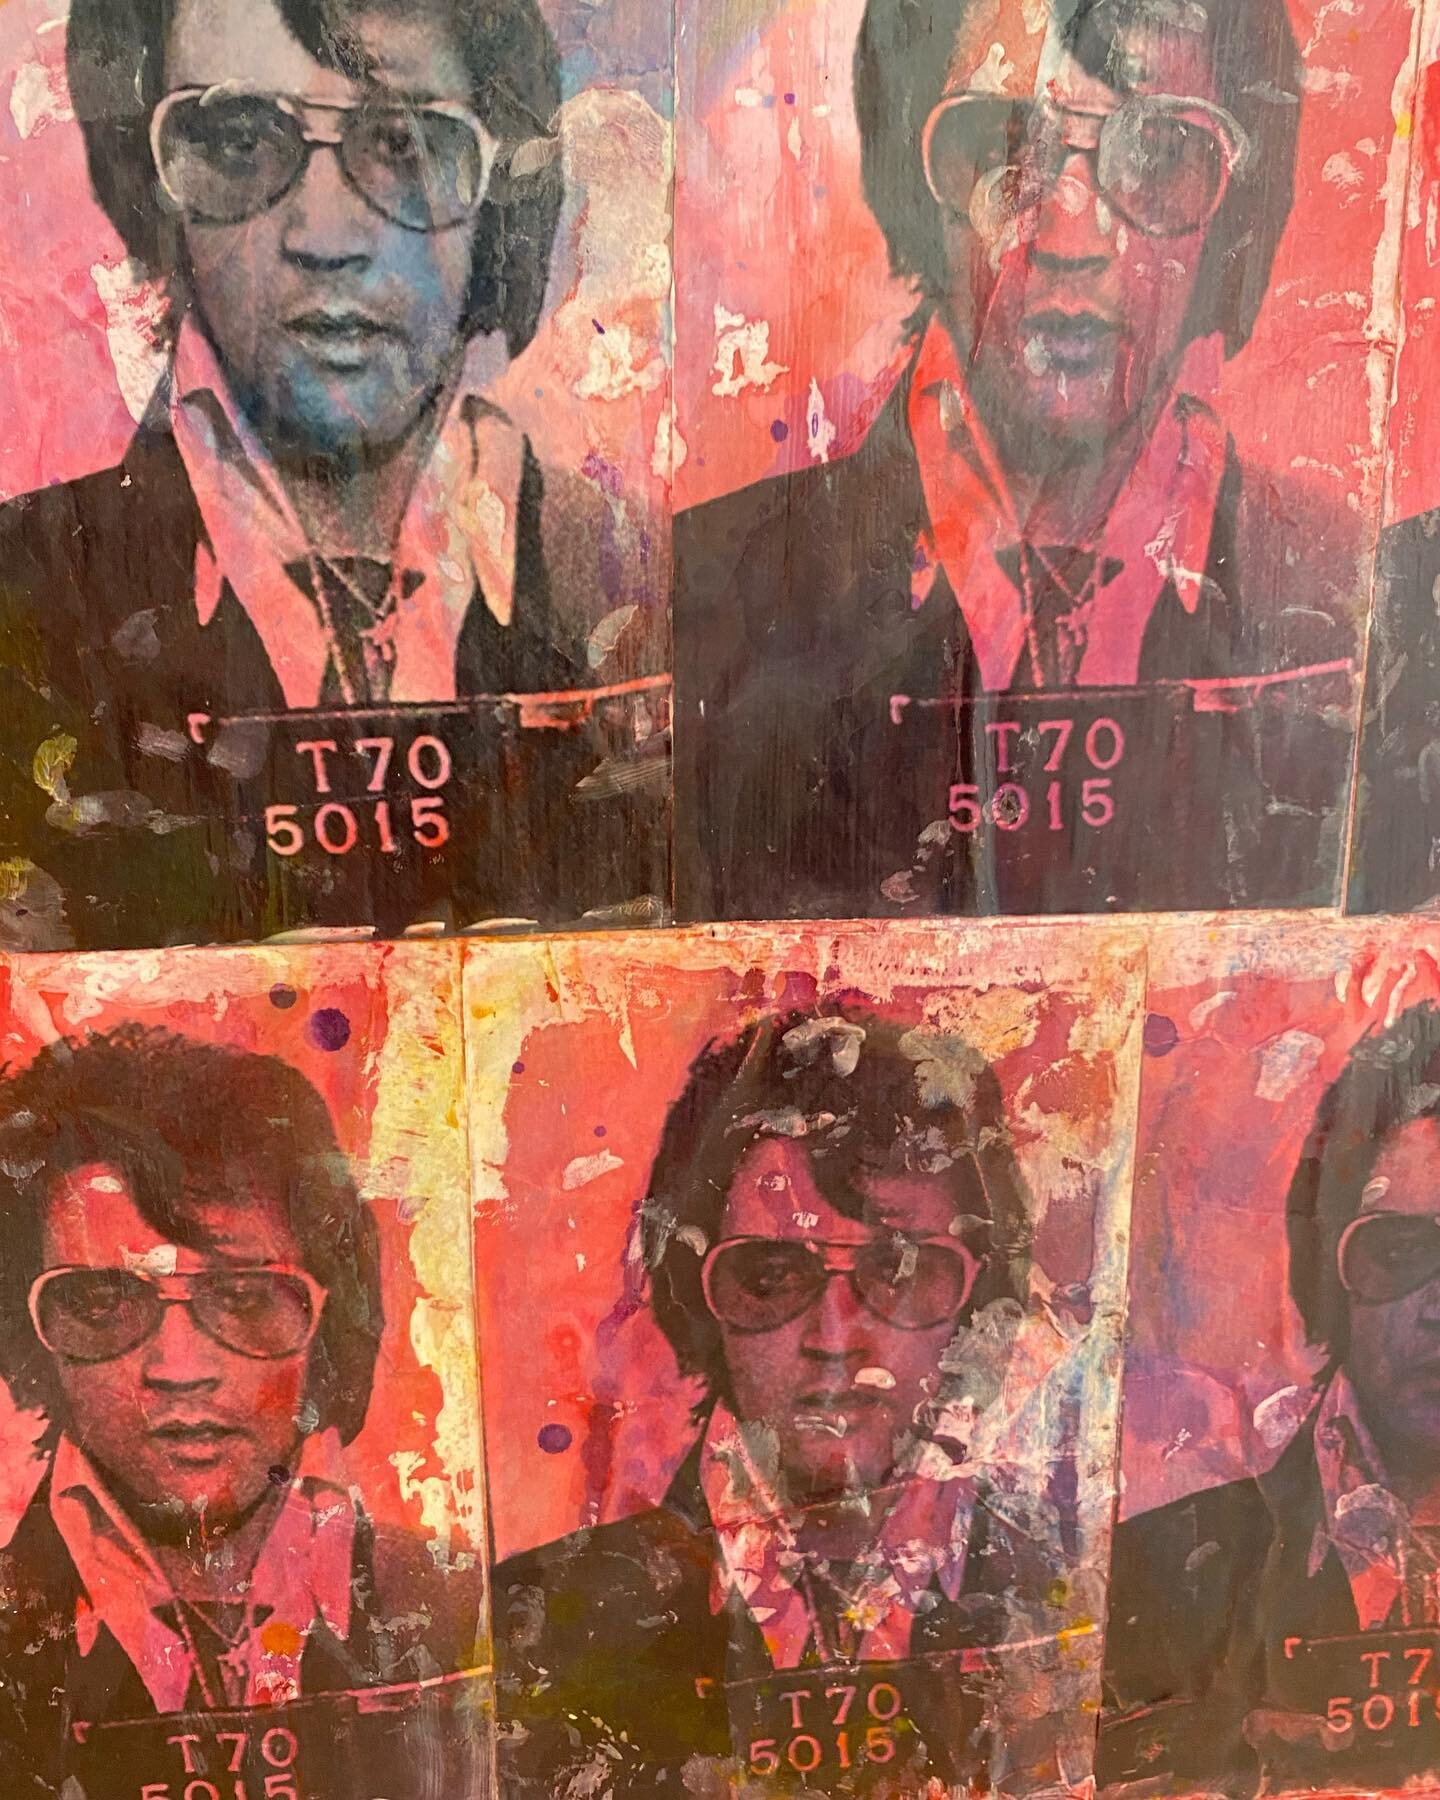 What&rsquo;s better than one Elvis? How about 40. The more you look at this, the more you see. Available.
&bull;
&bull;
#reckerart #elvispresley #popart #elvis #elvisforever #elvispresleyfans #graceland #elvisart #torontoartist #torontopopartist #tor